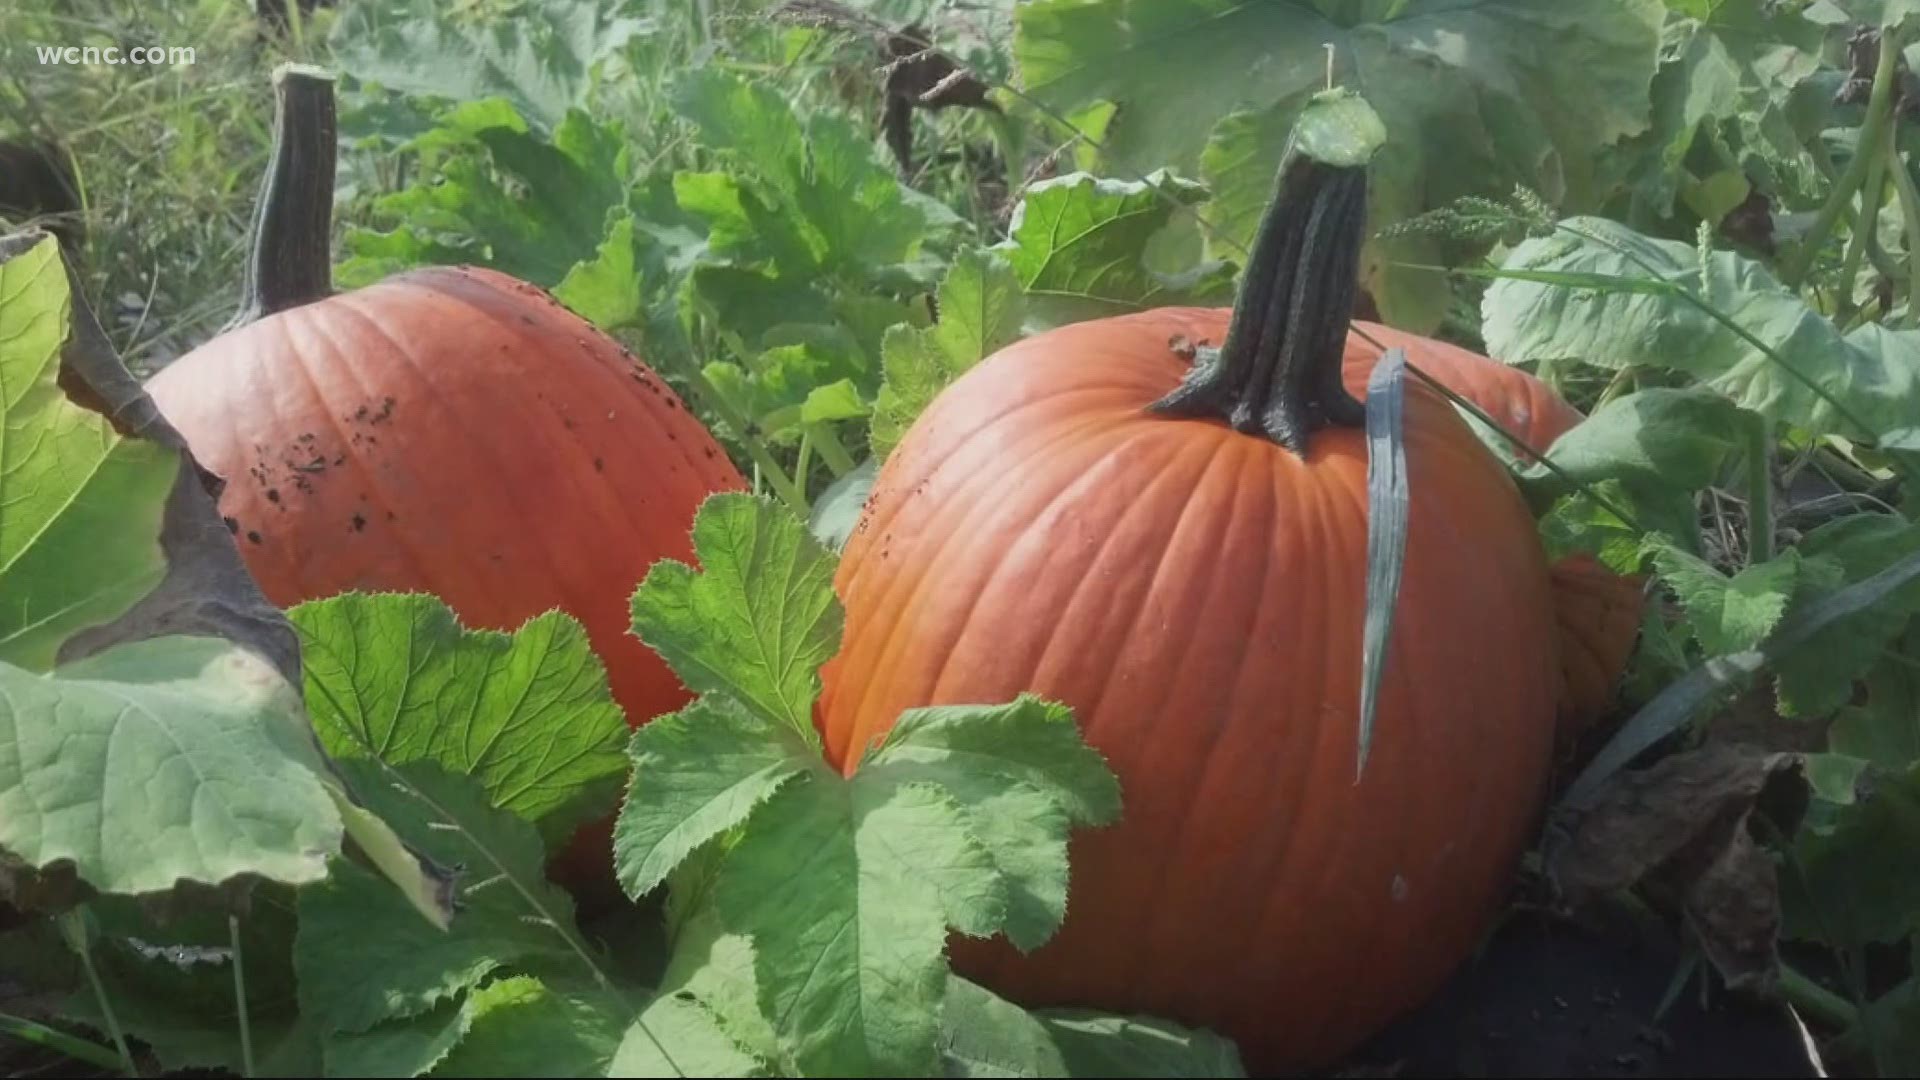 A farm in York is letting people pick their own pumpkins right off the vine.